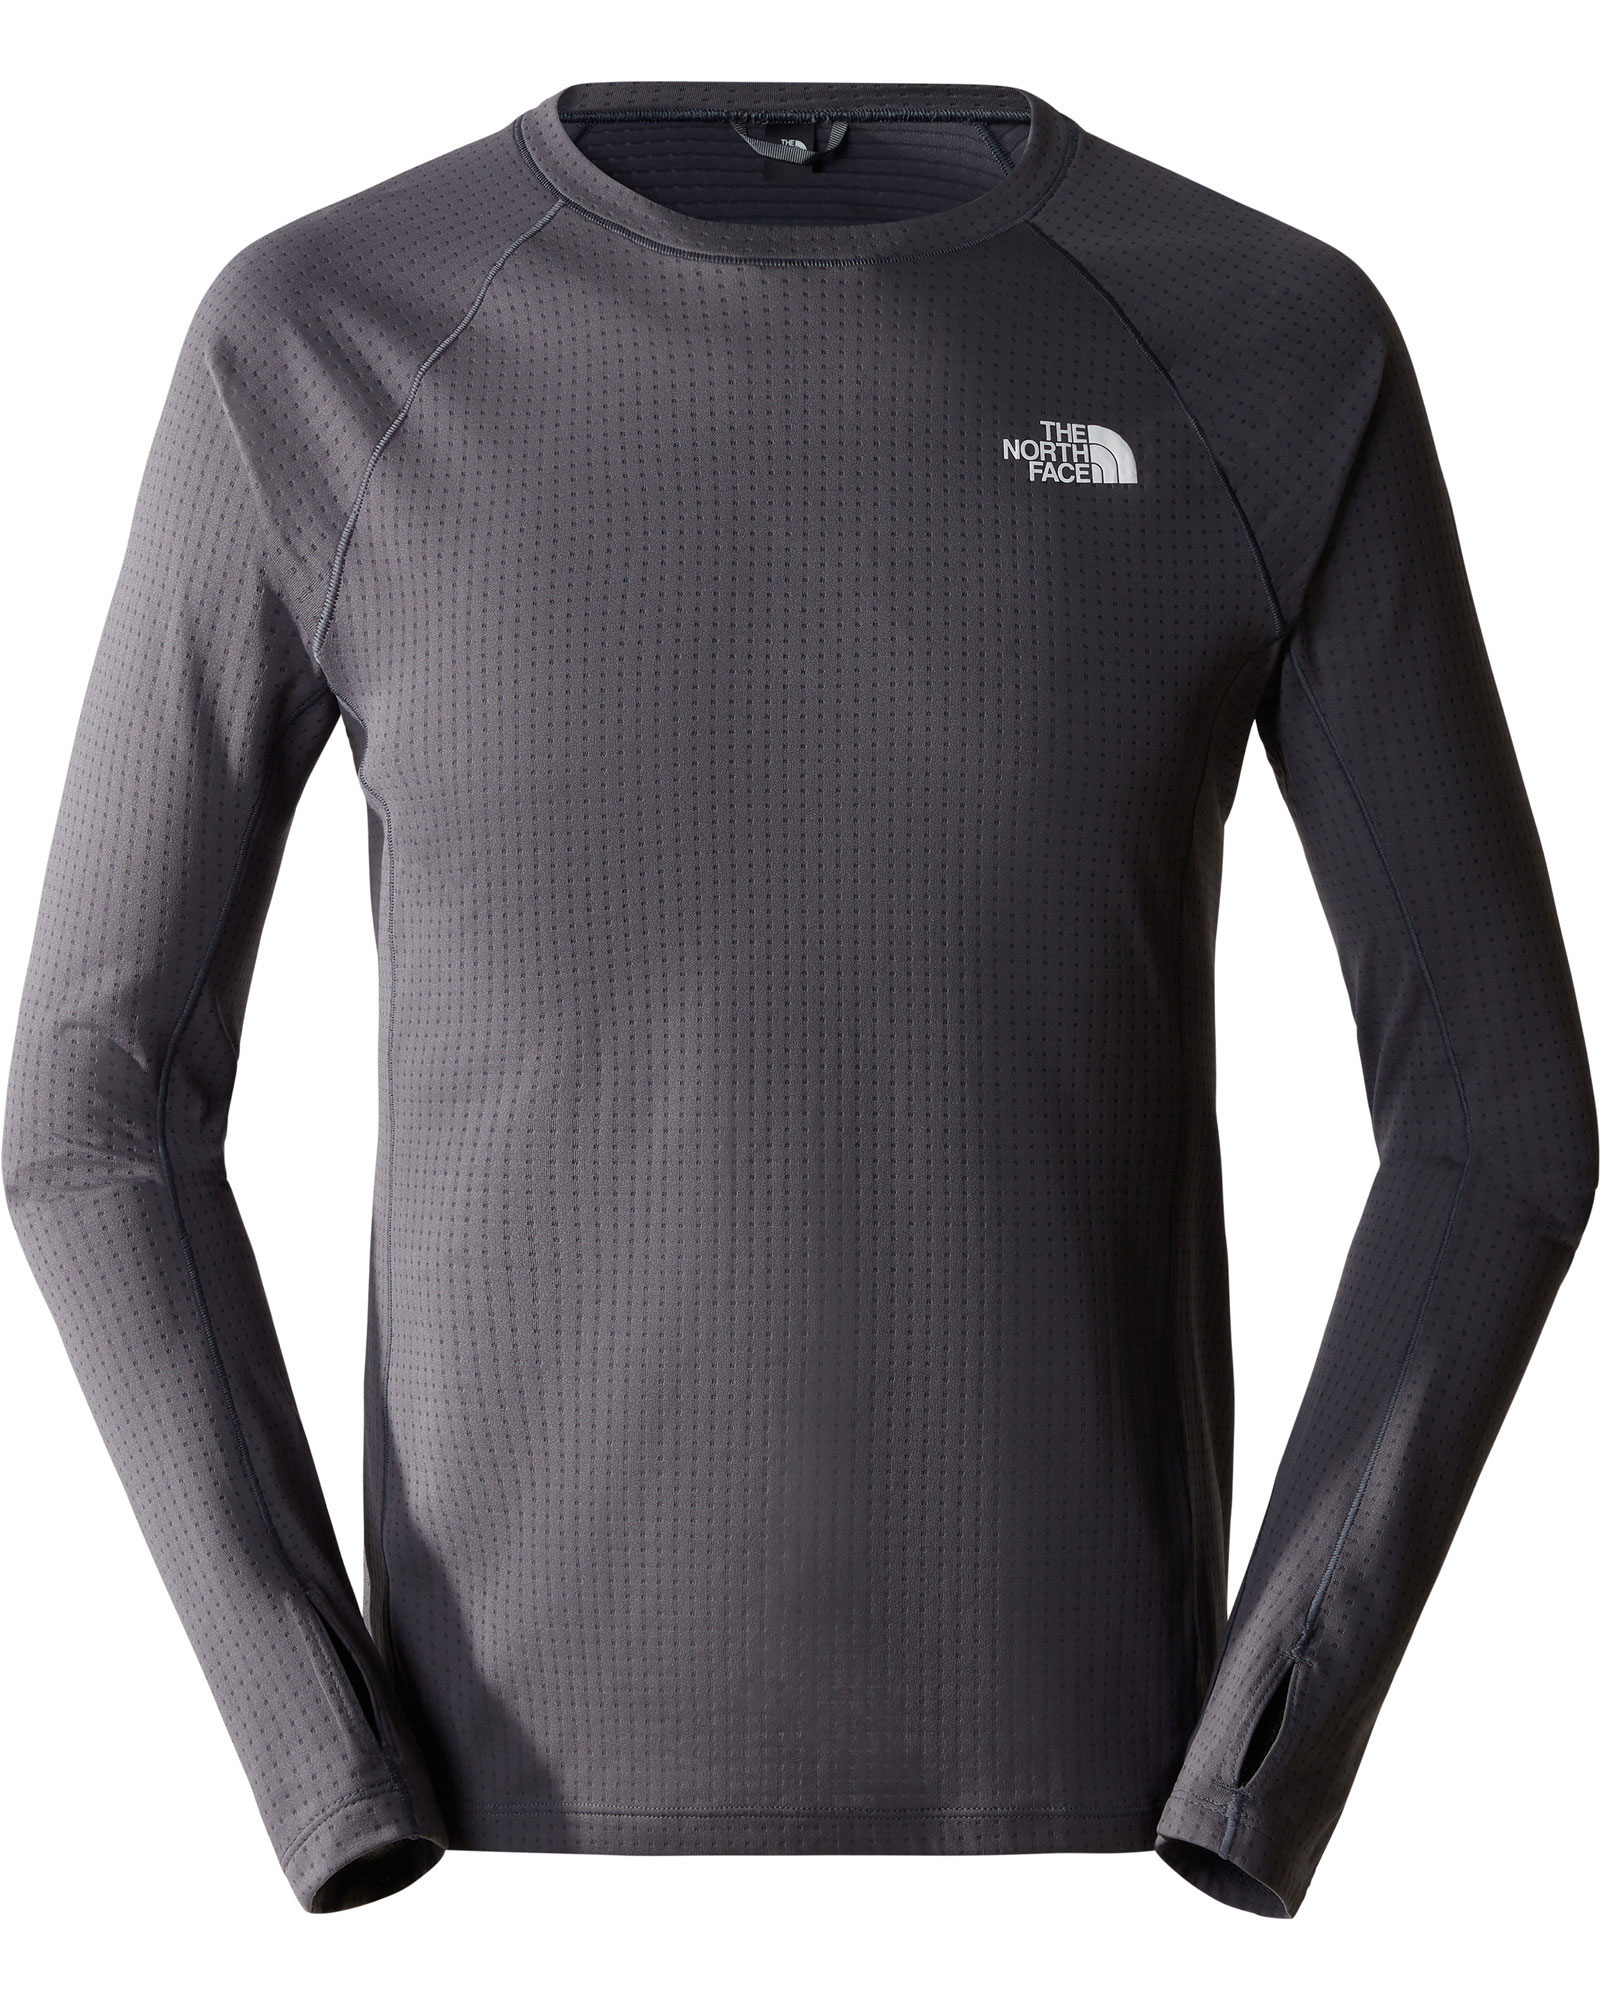 The North Face Summit Pro 120 Mens Long Sleeve Crew T-shirt